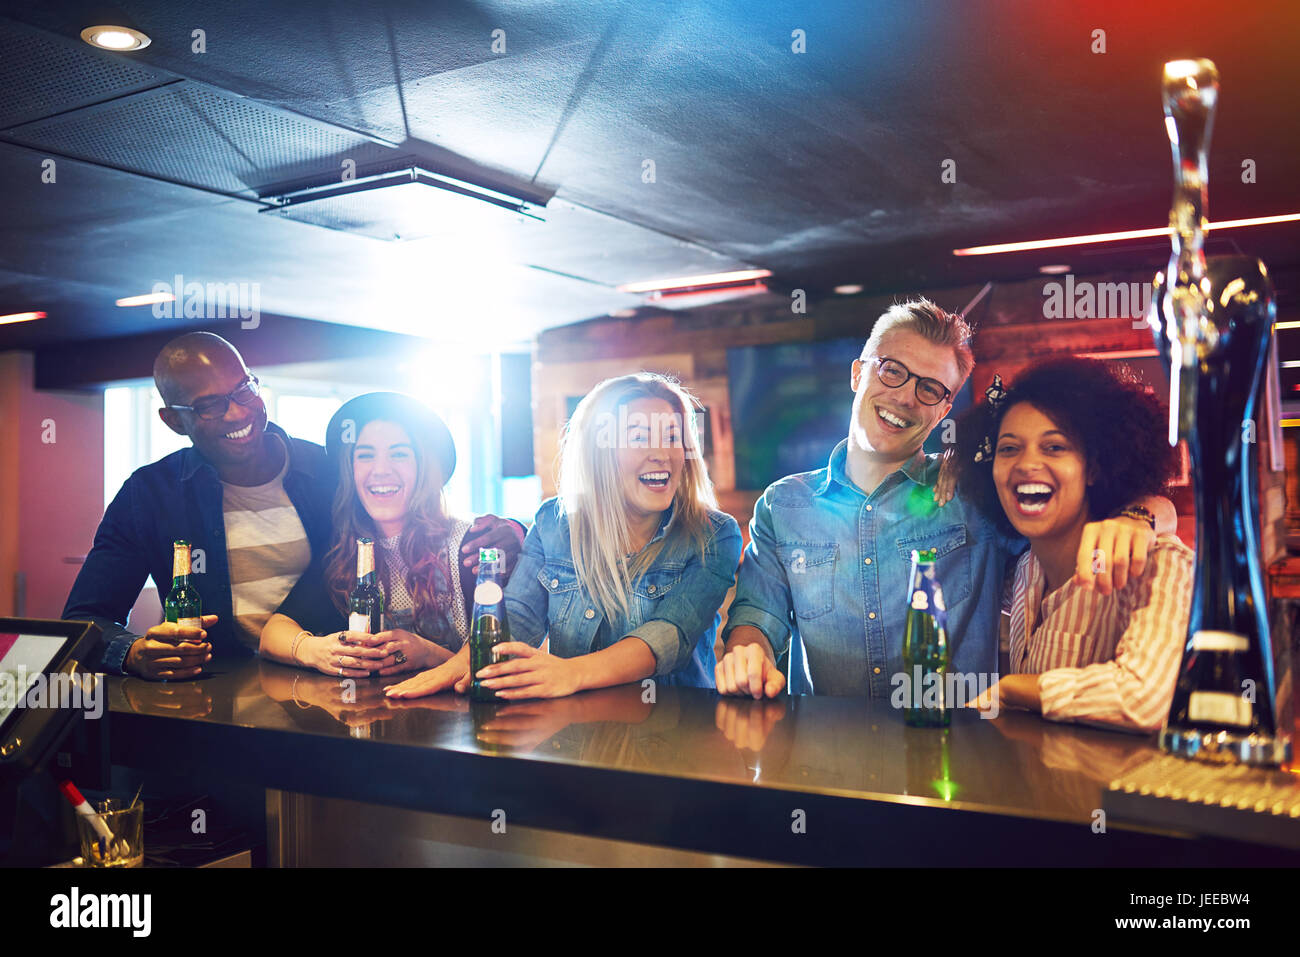 A group of friends inside the bar laughing while communicating and looking at camera. Stock Photo